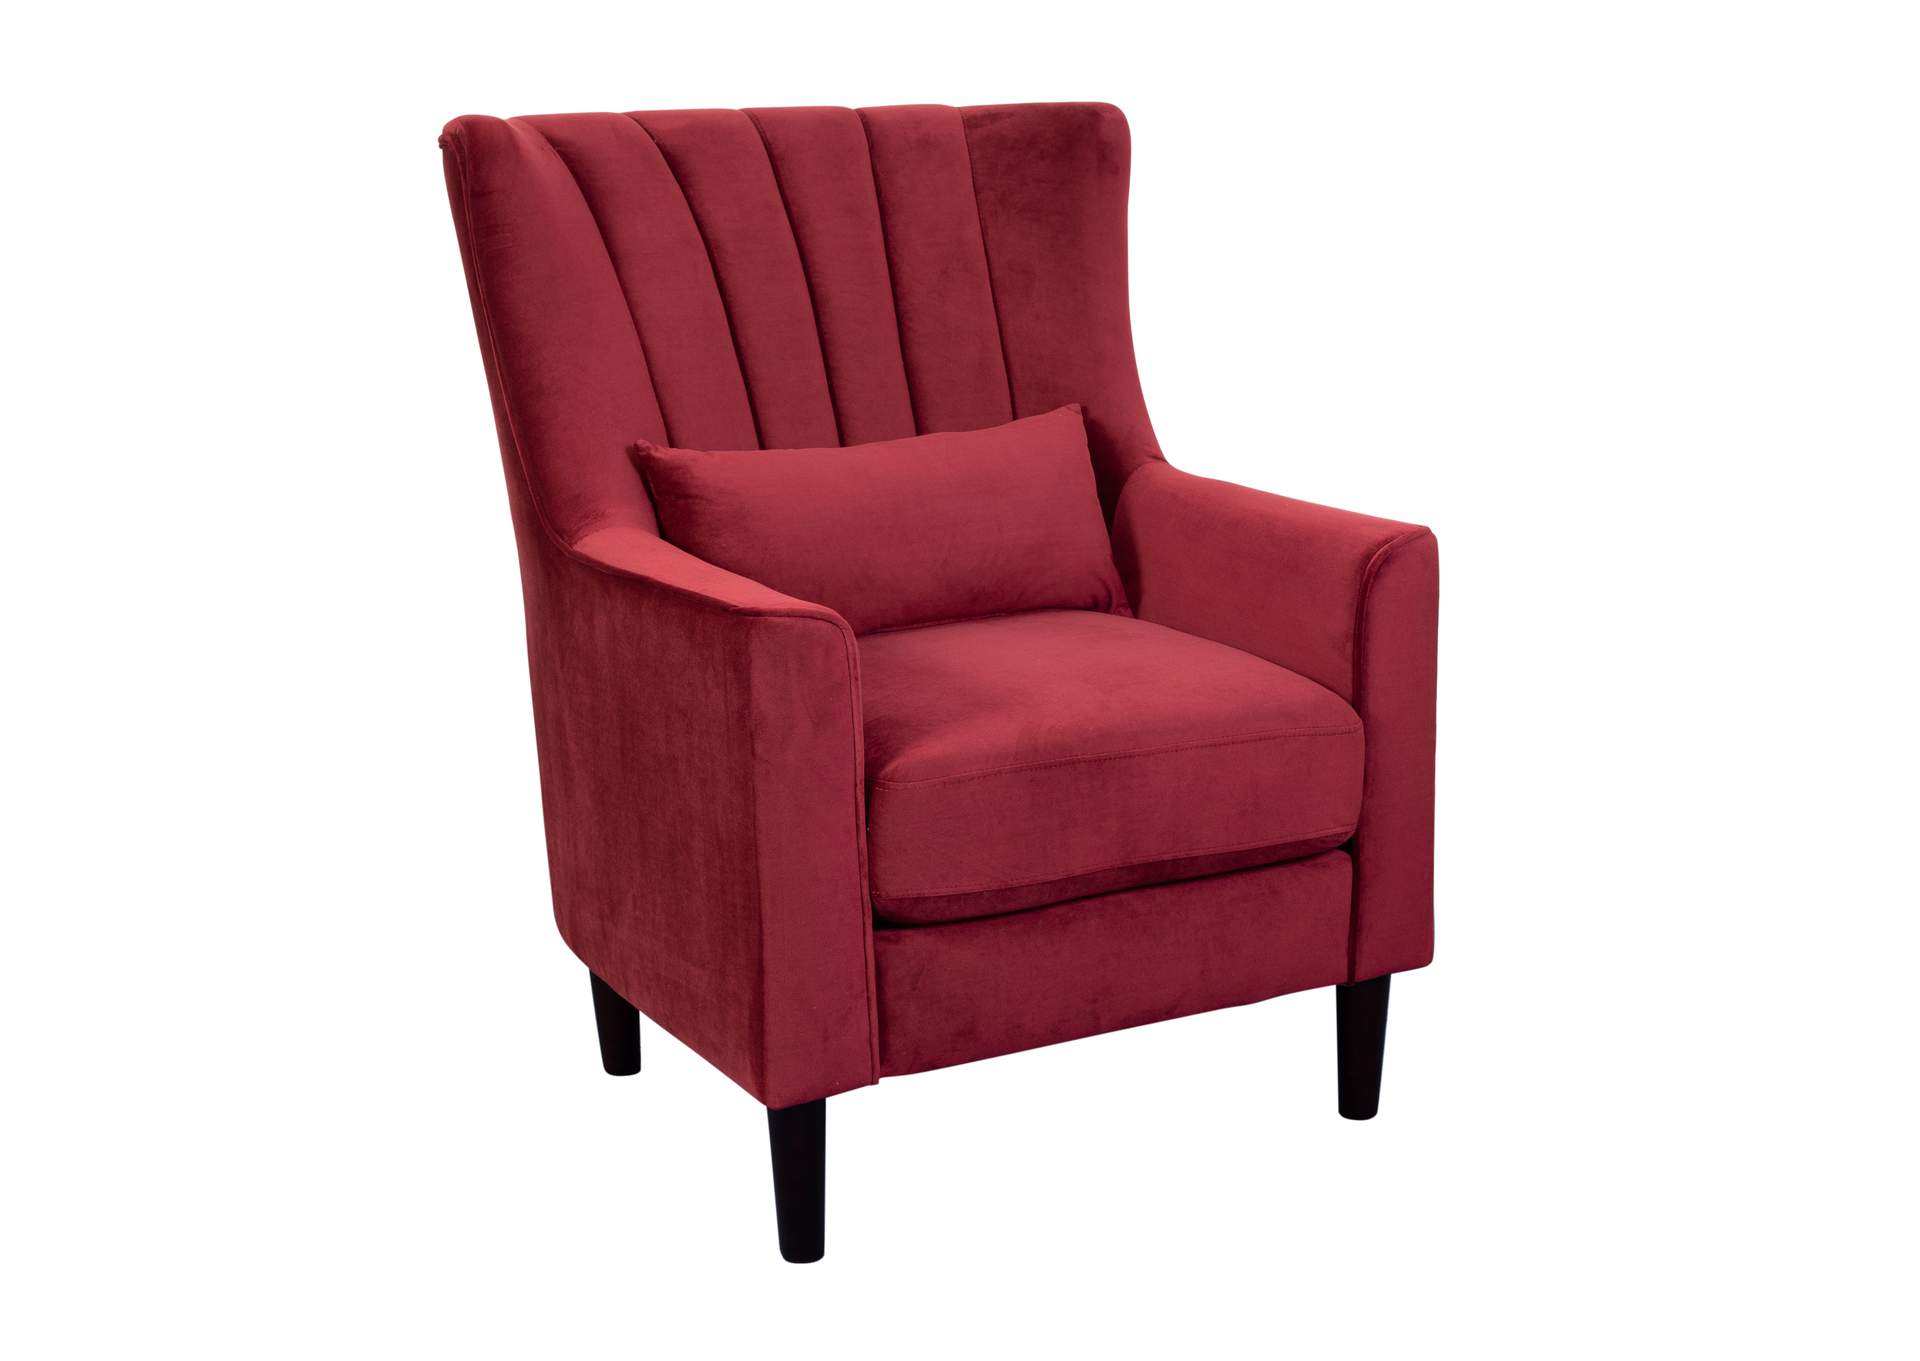 Kate Ac933 Red Chair,Porter Designs